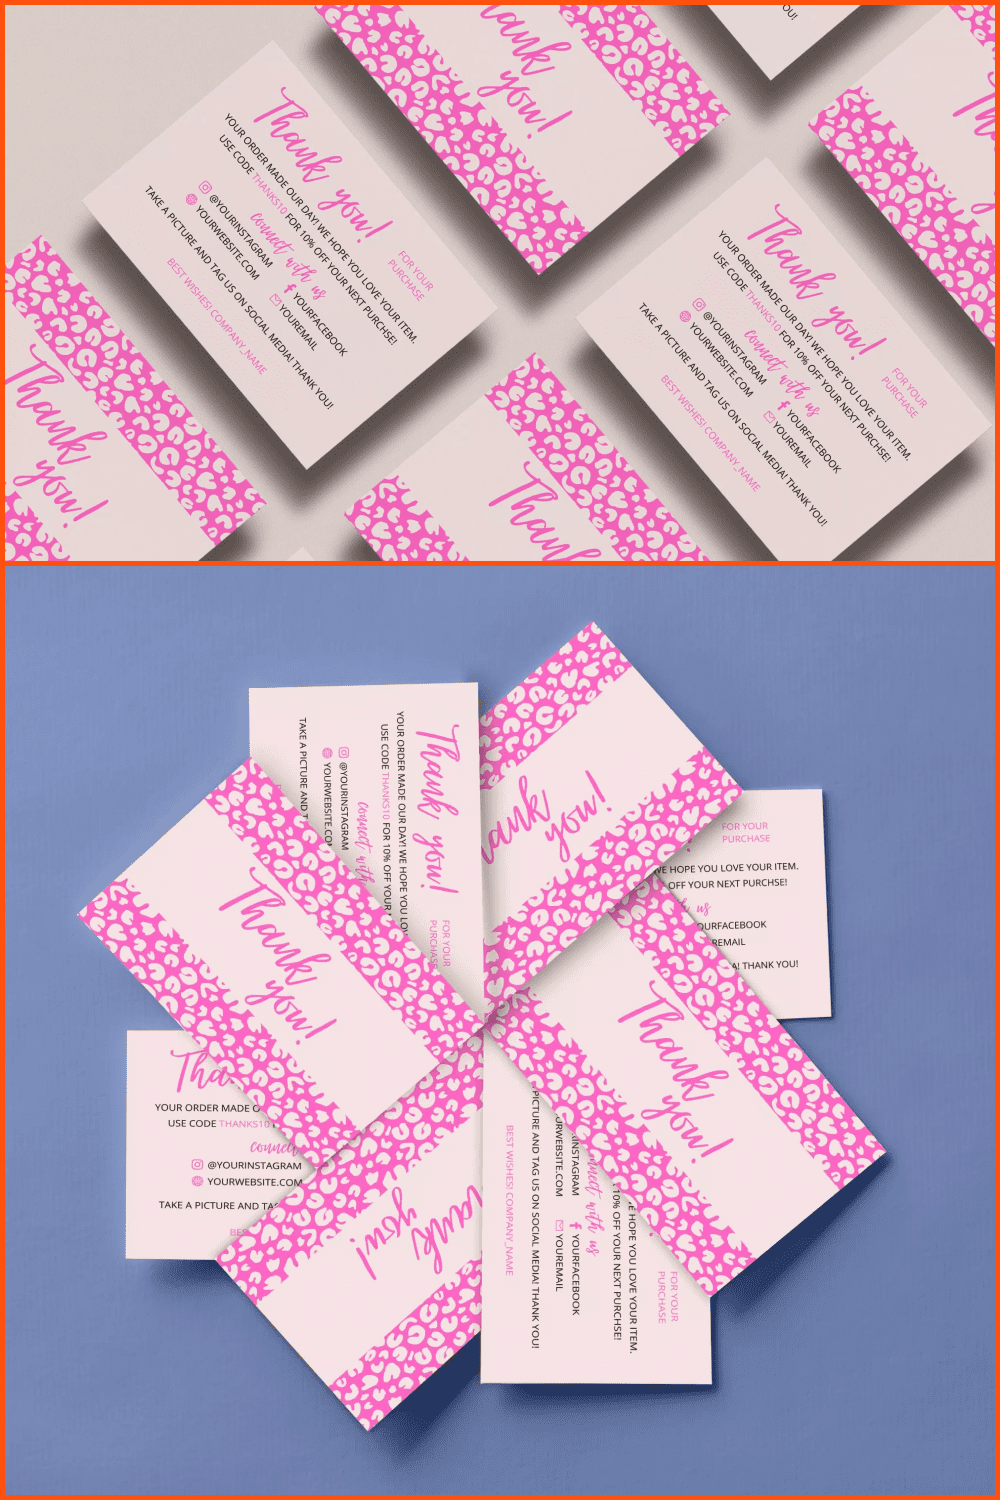 Collage of images of cards with pink text Thank you.